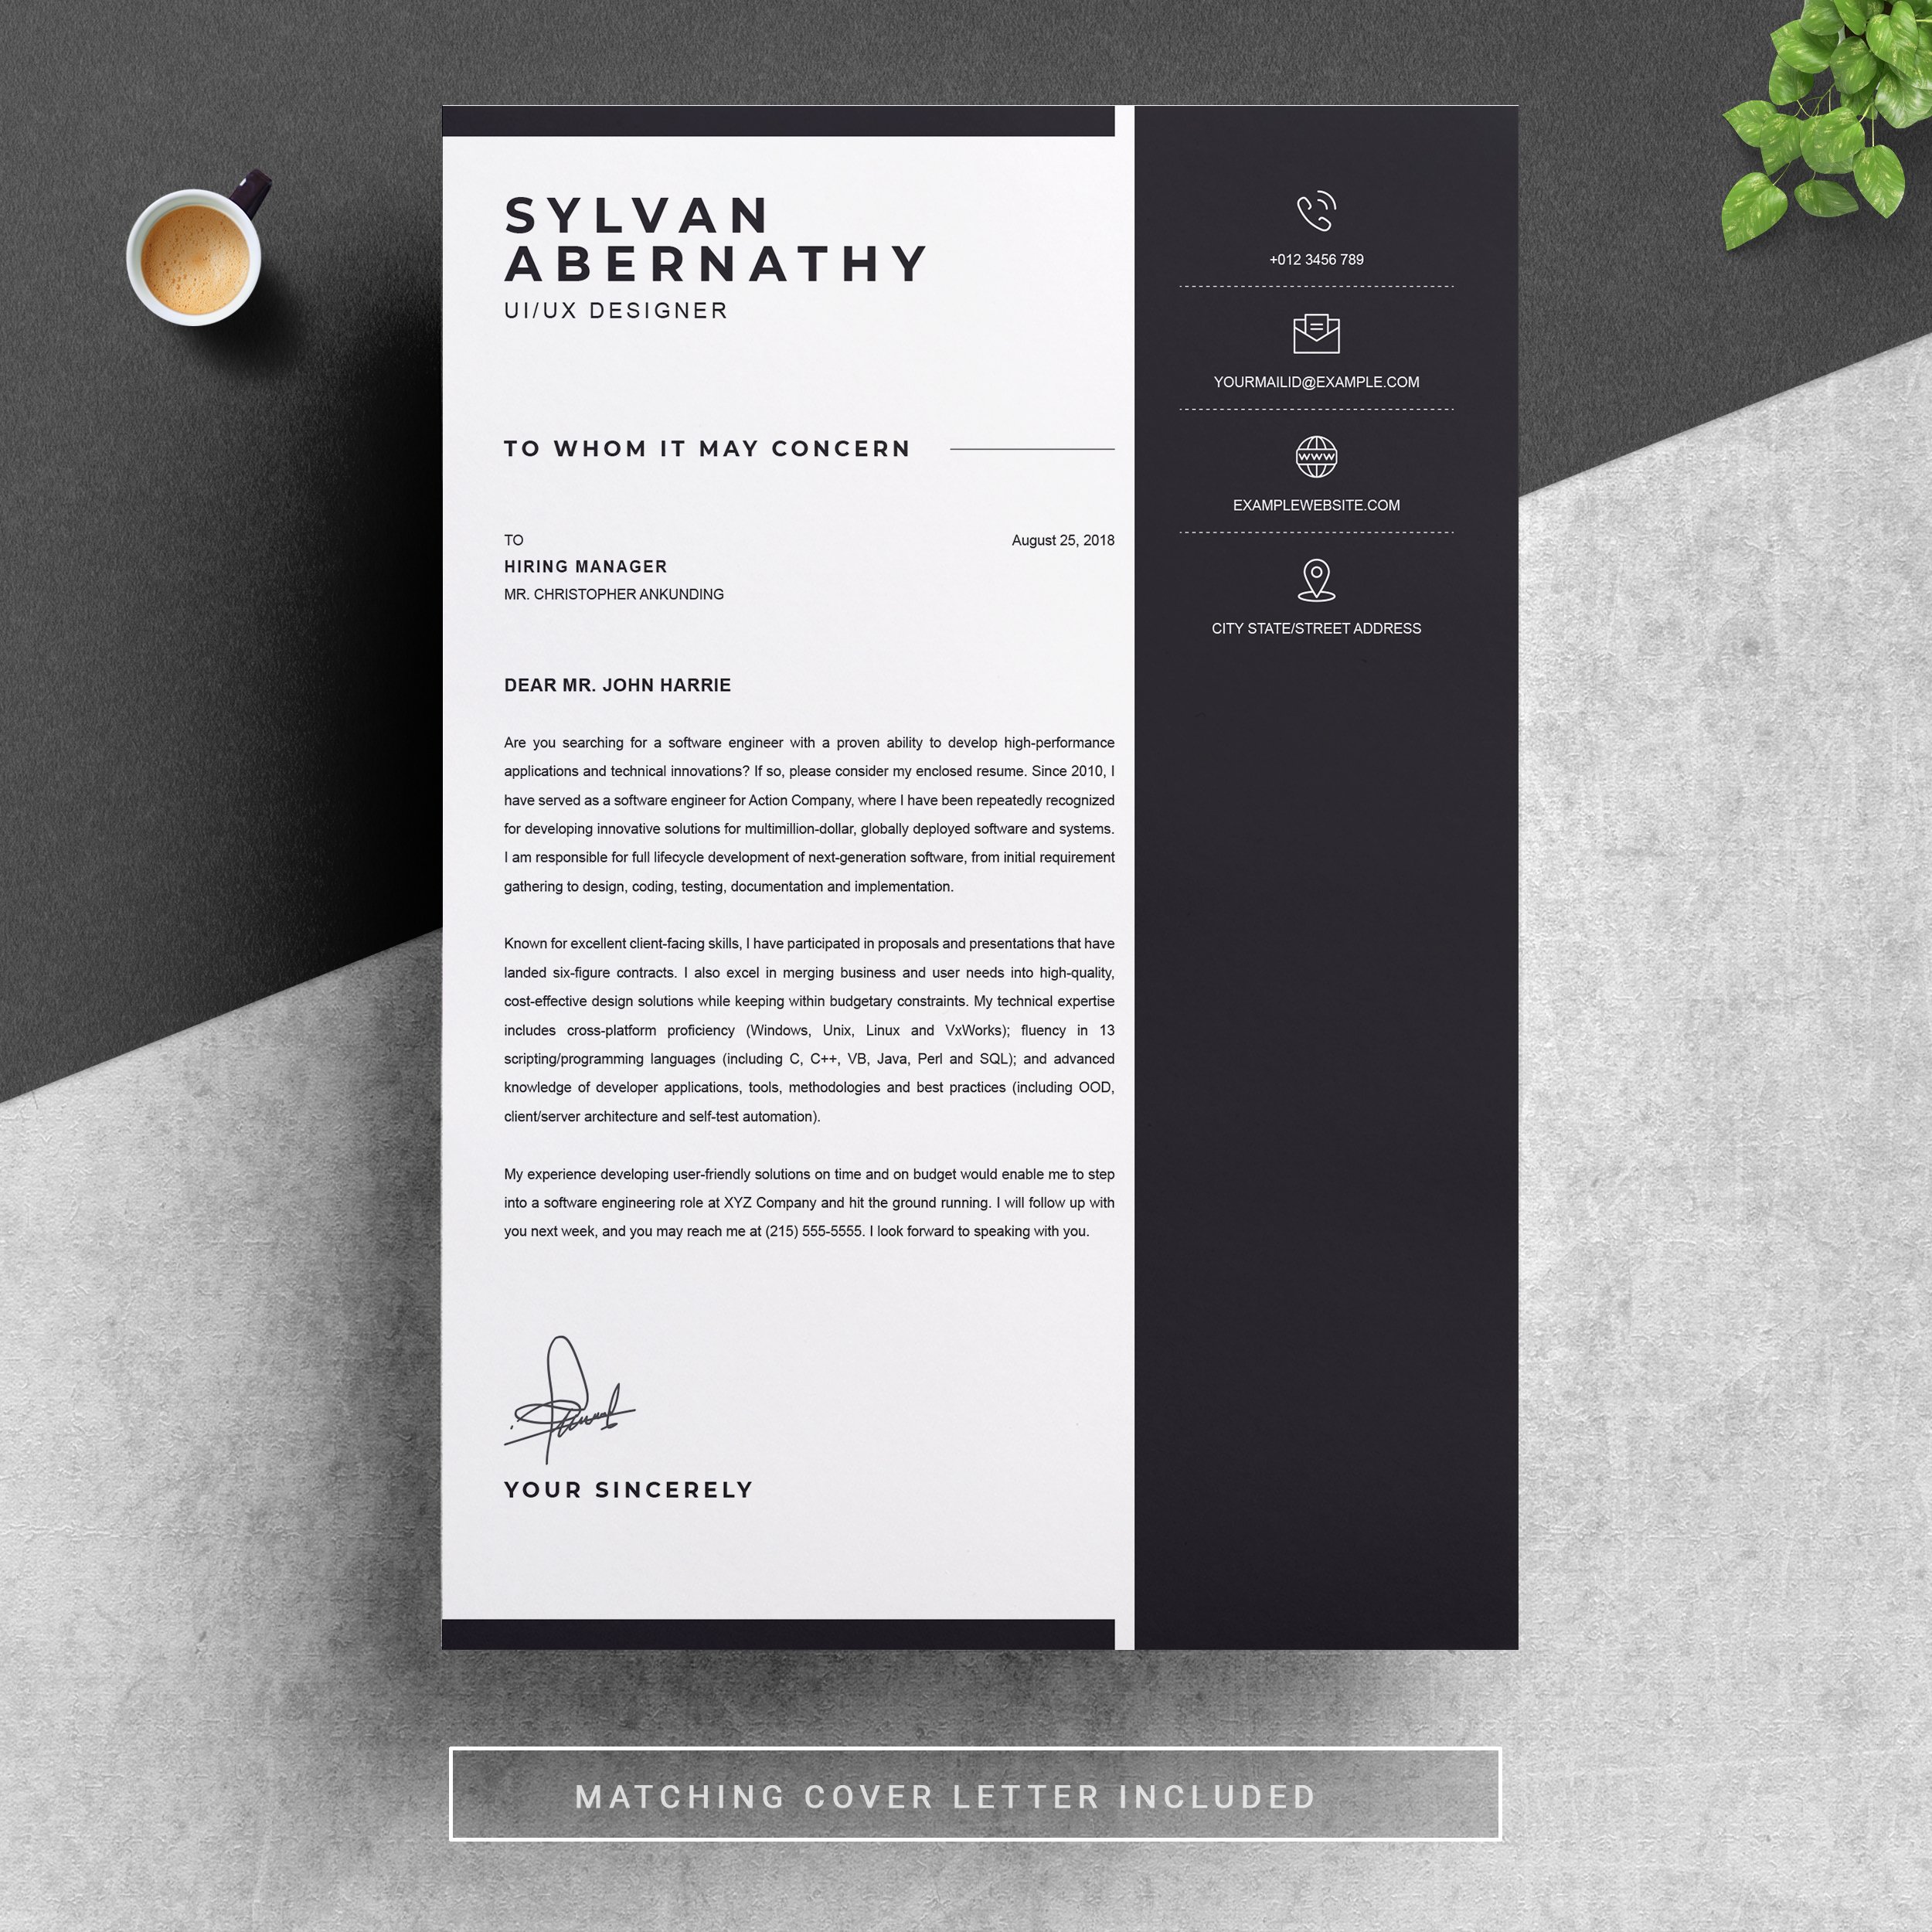 03 resume cover letter page free resume design template 212 2